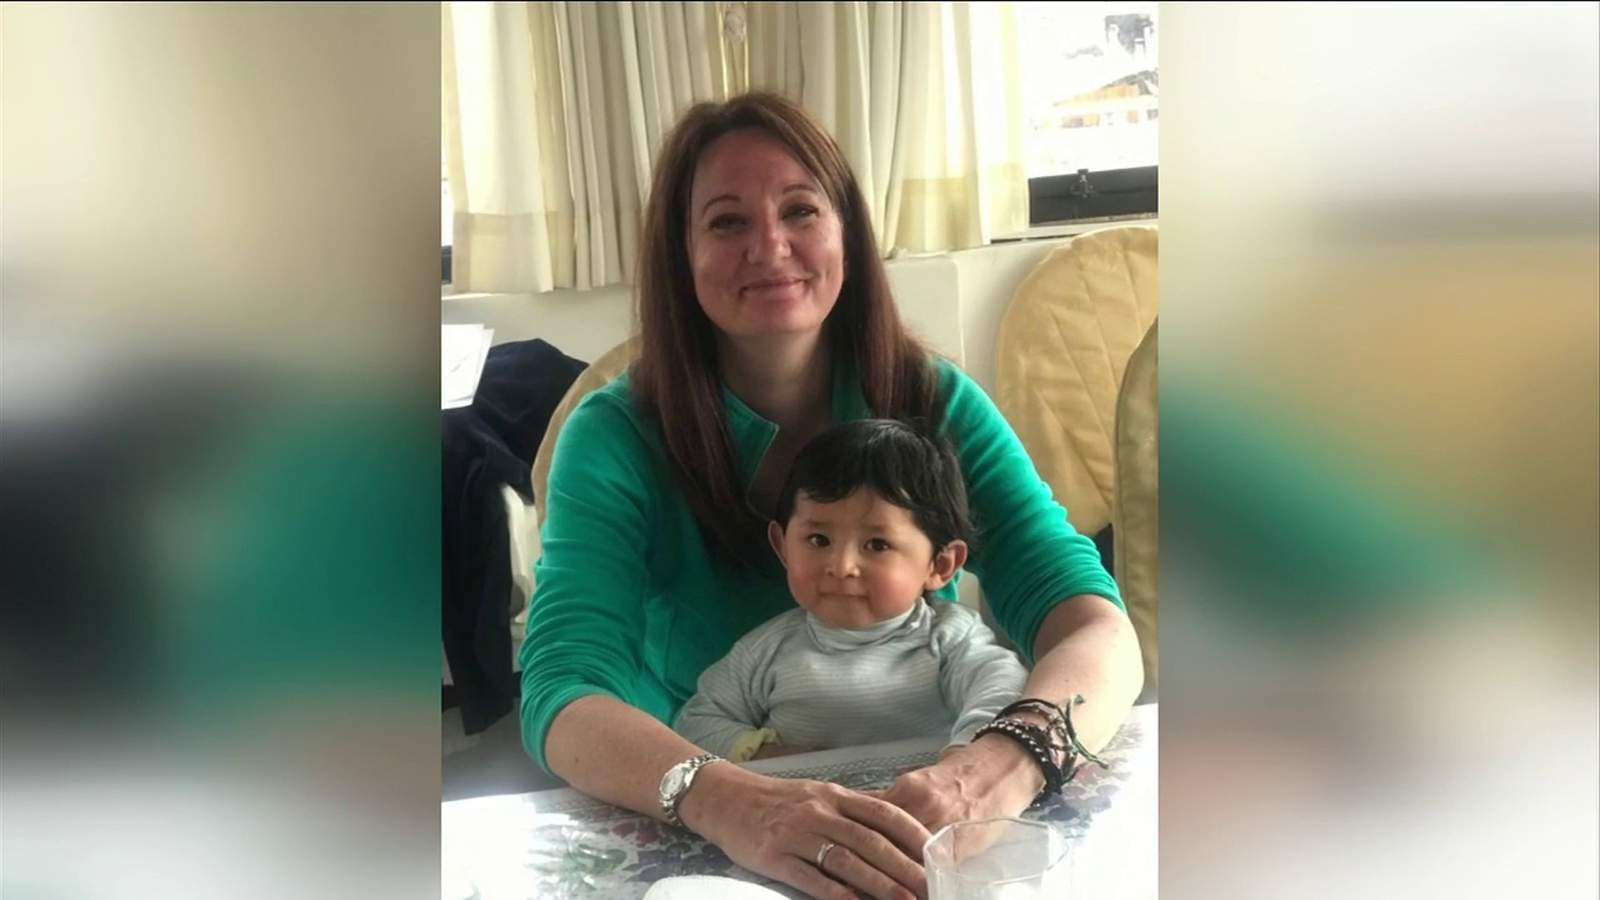 Woman stranded in Peru after country locked down due to coronavirus